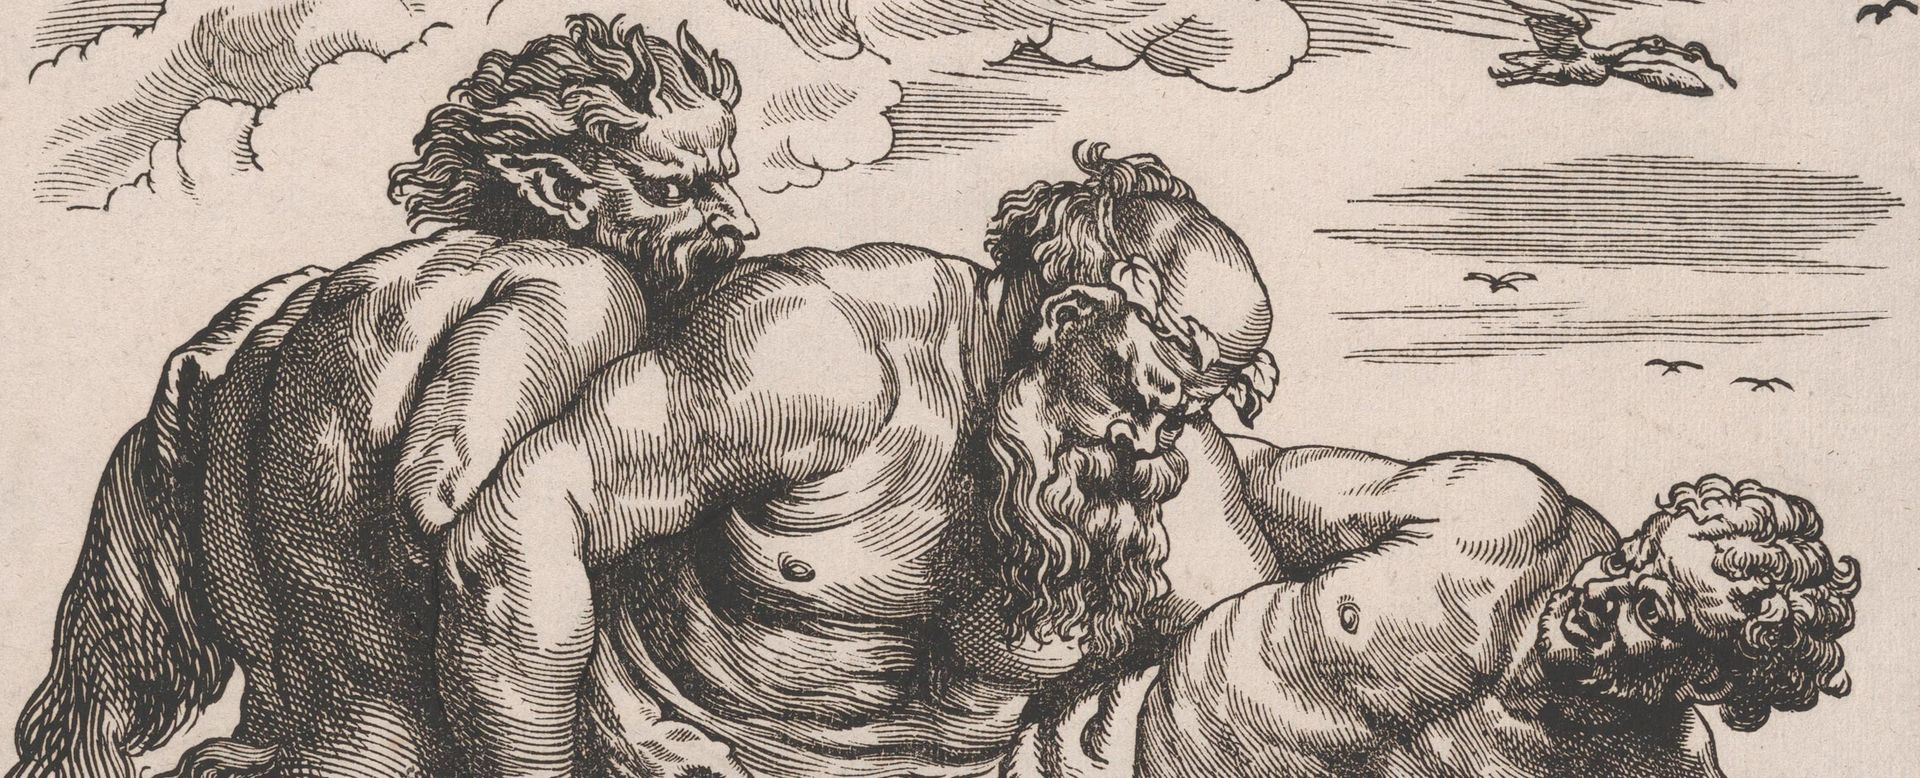 Detail view of three figures from the woodcut "The March of Silenus" by Christoffel Jegher (after Peter Paul Rubens)